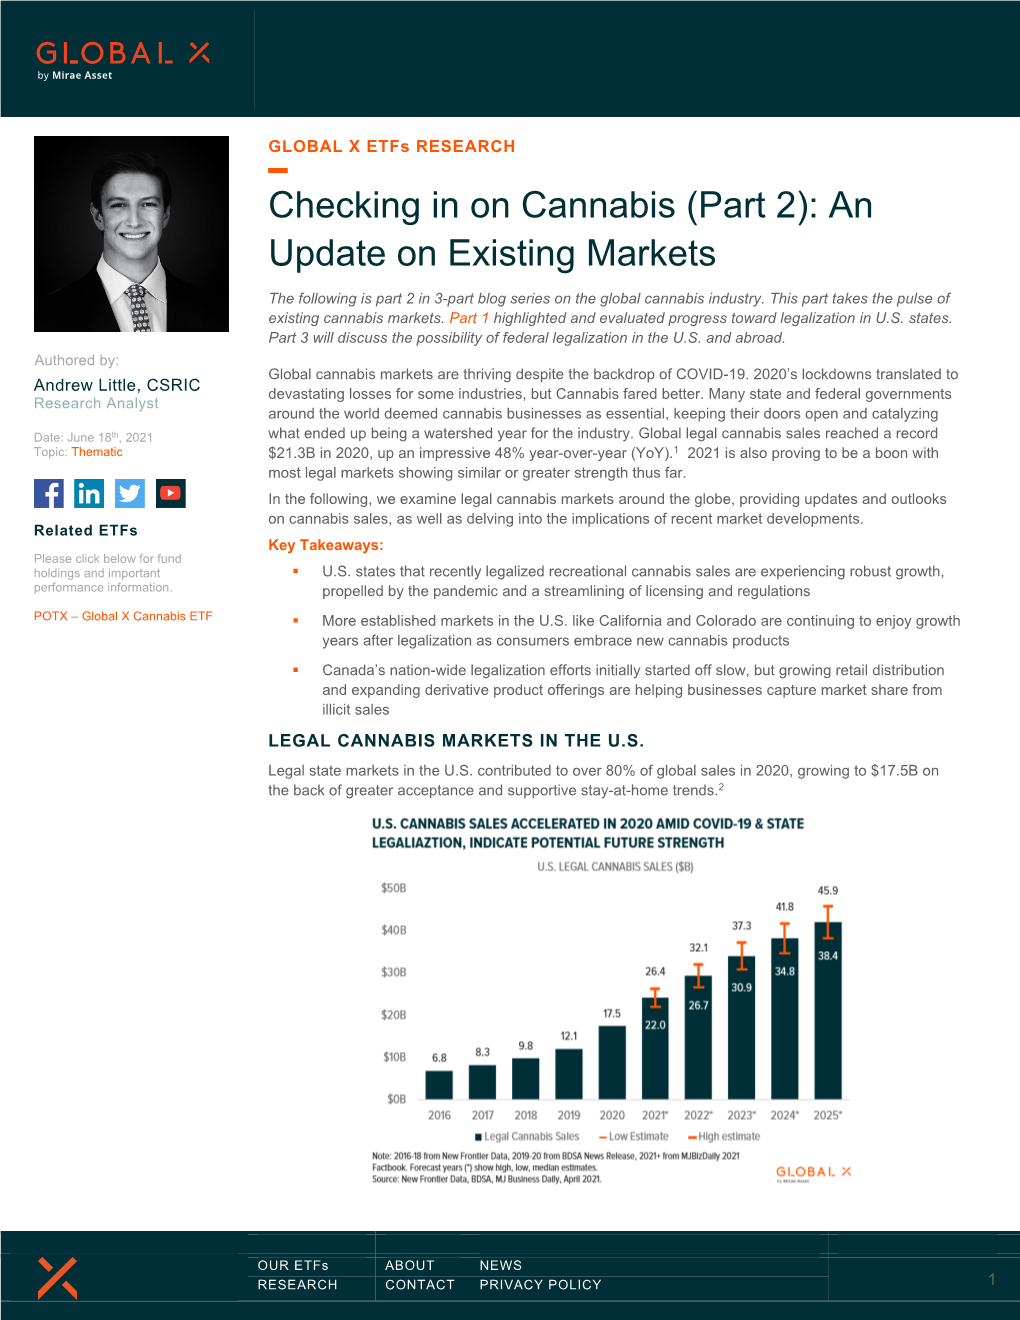 Checking in on Cannabis (Part 2): an Update on Existing Markets